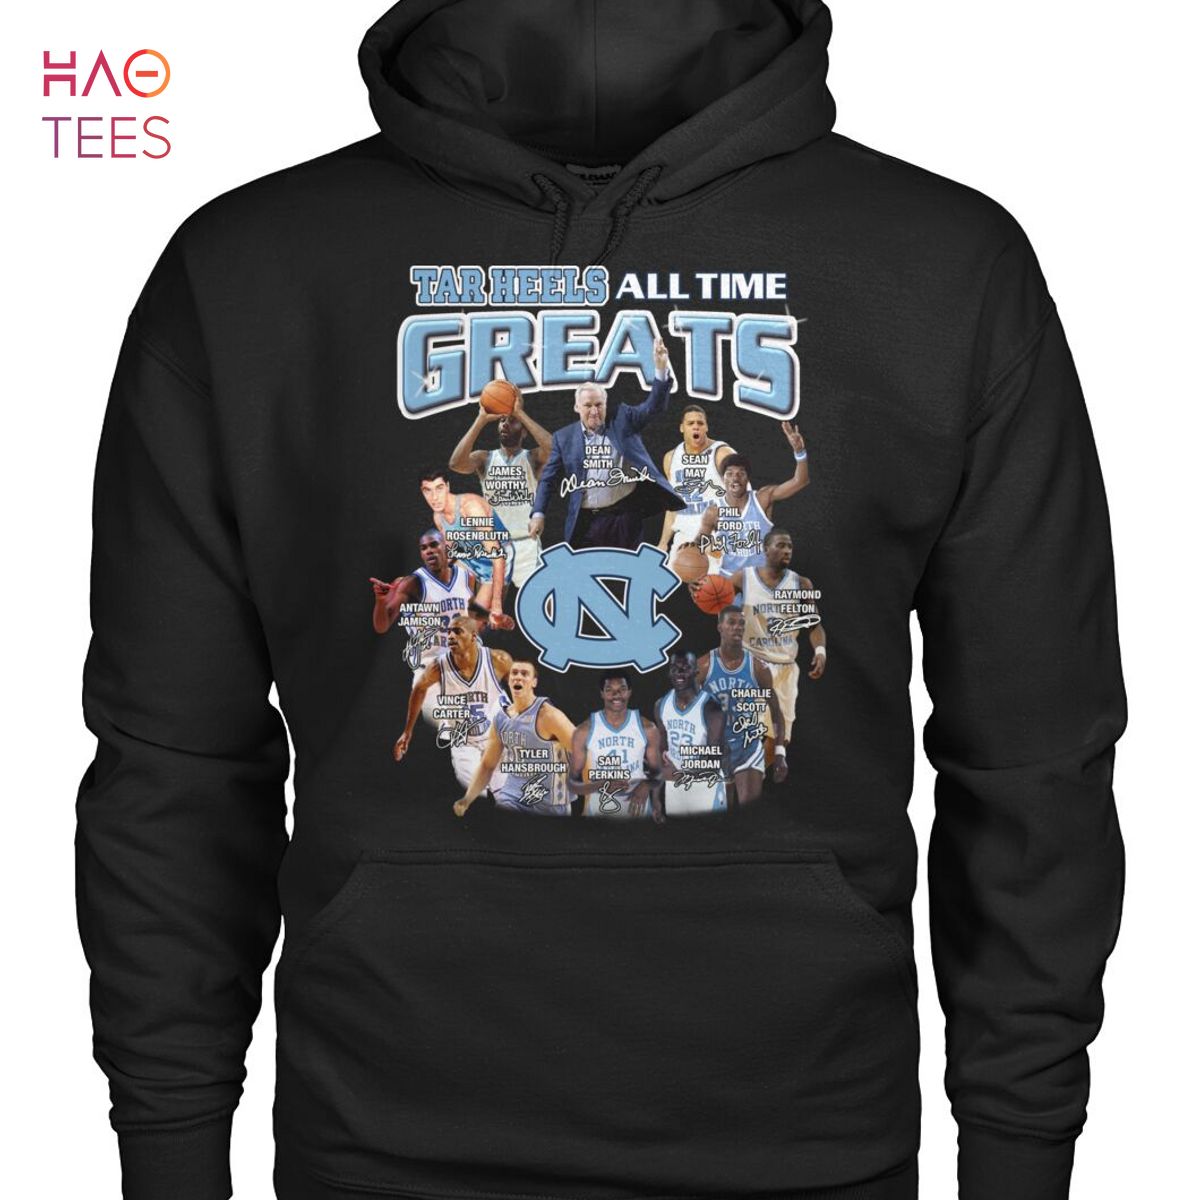 Tar Heels All Time Greats Shirt Limited Edition